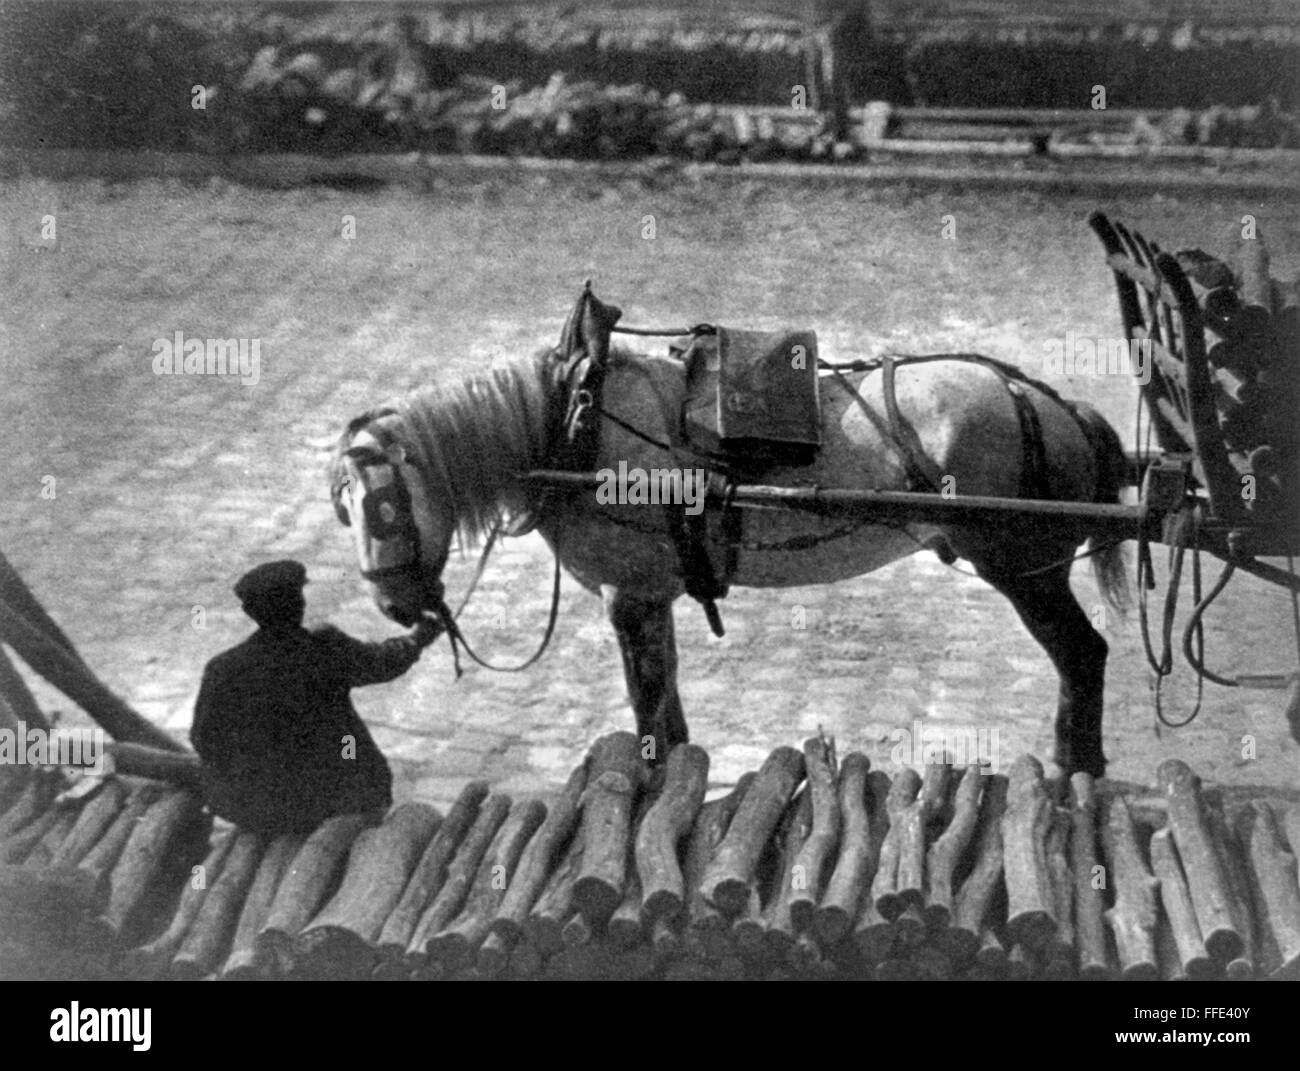 STIEGLITZ: PARIS, 1911. /nMan holding the reins to a horse pulling a cart in Paris, France. Photograph by Alfred Stieglitz, 1911. Stock Photo